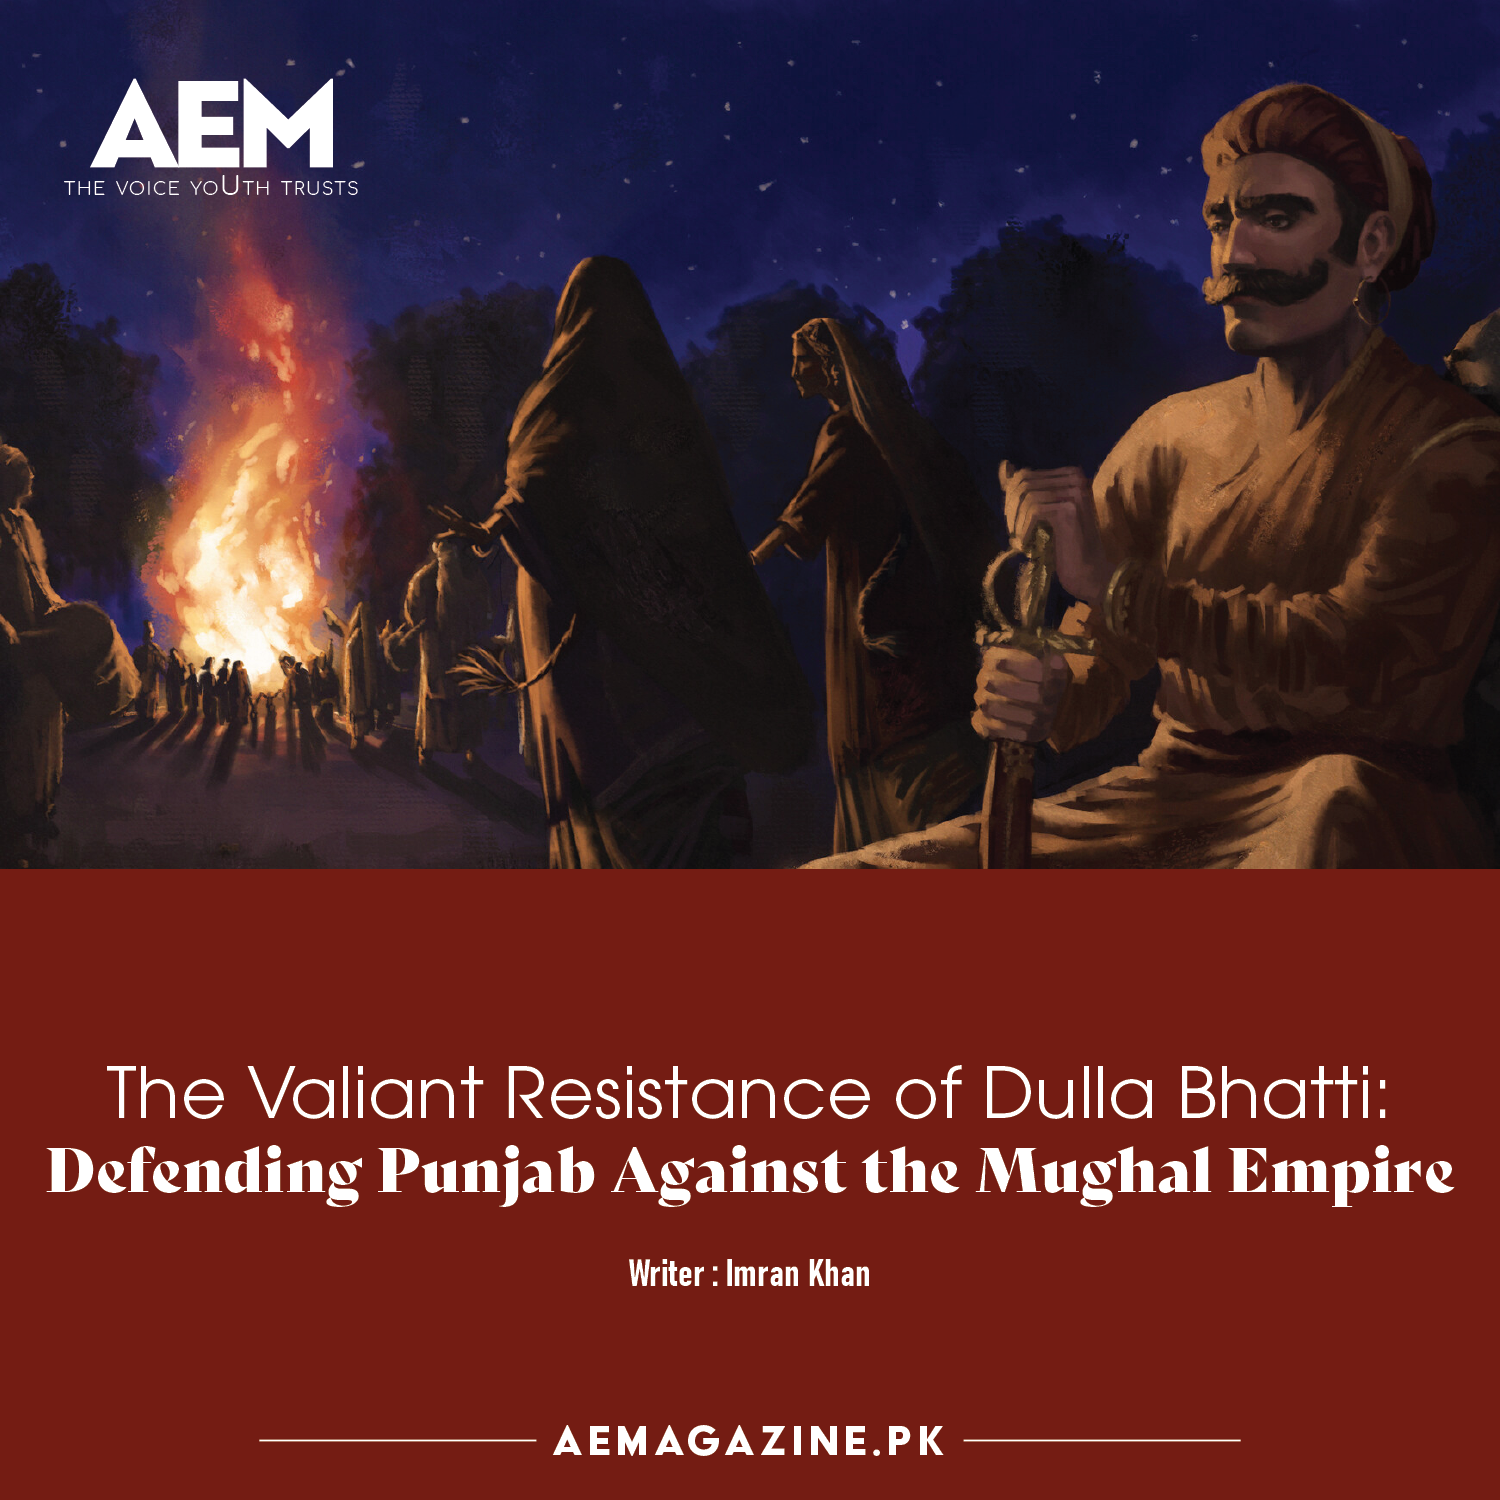 The Valiant Resistance of Dulla Bhatti: Defending Punjab Against the Mughal Empire